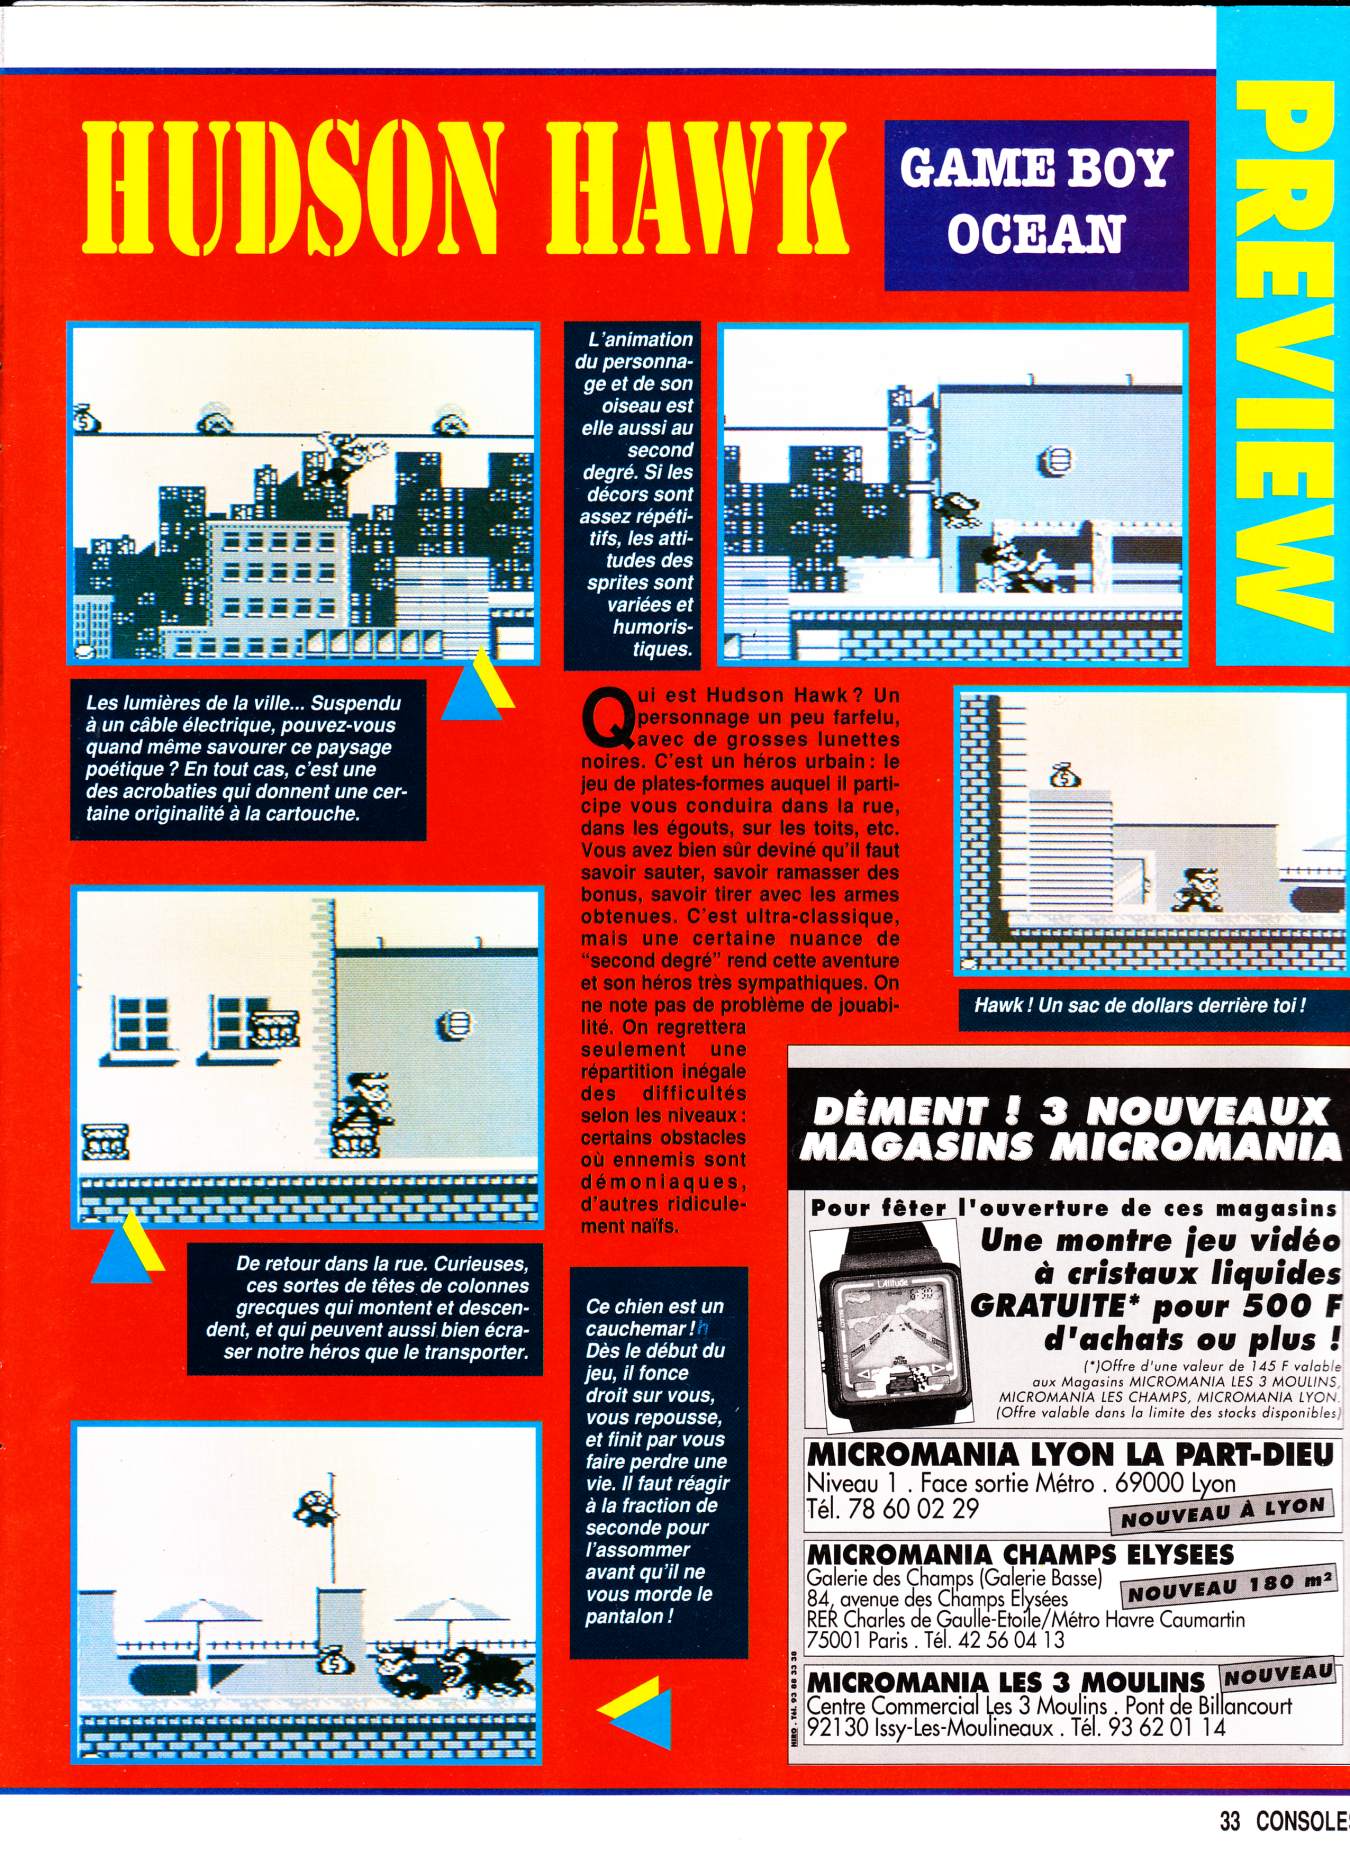 tests//863/Consoles + 008 - Page 033 (1992-04).jpg